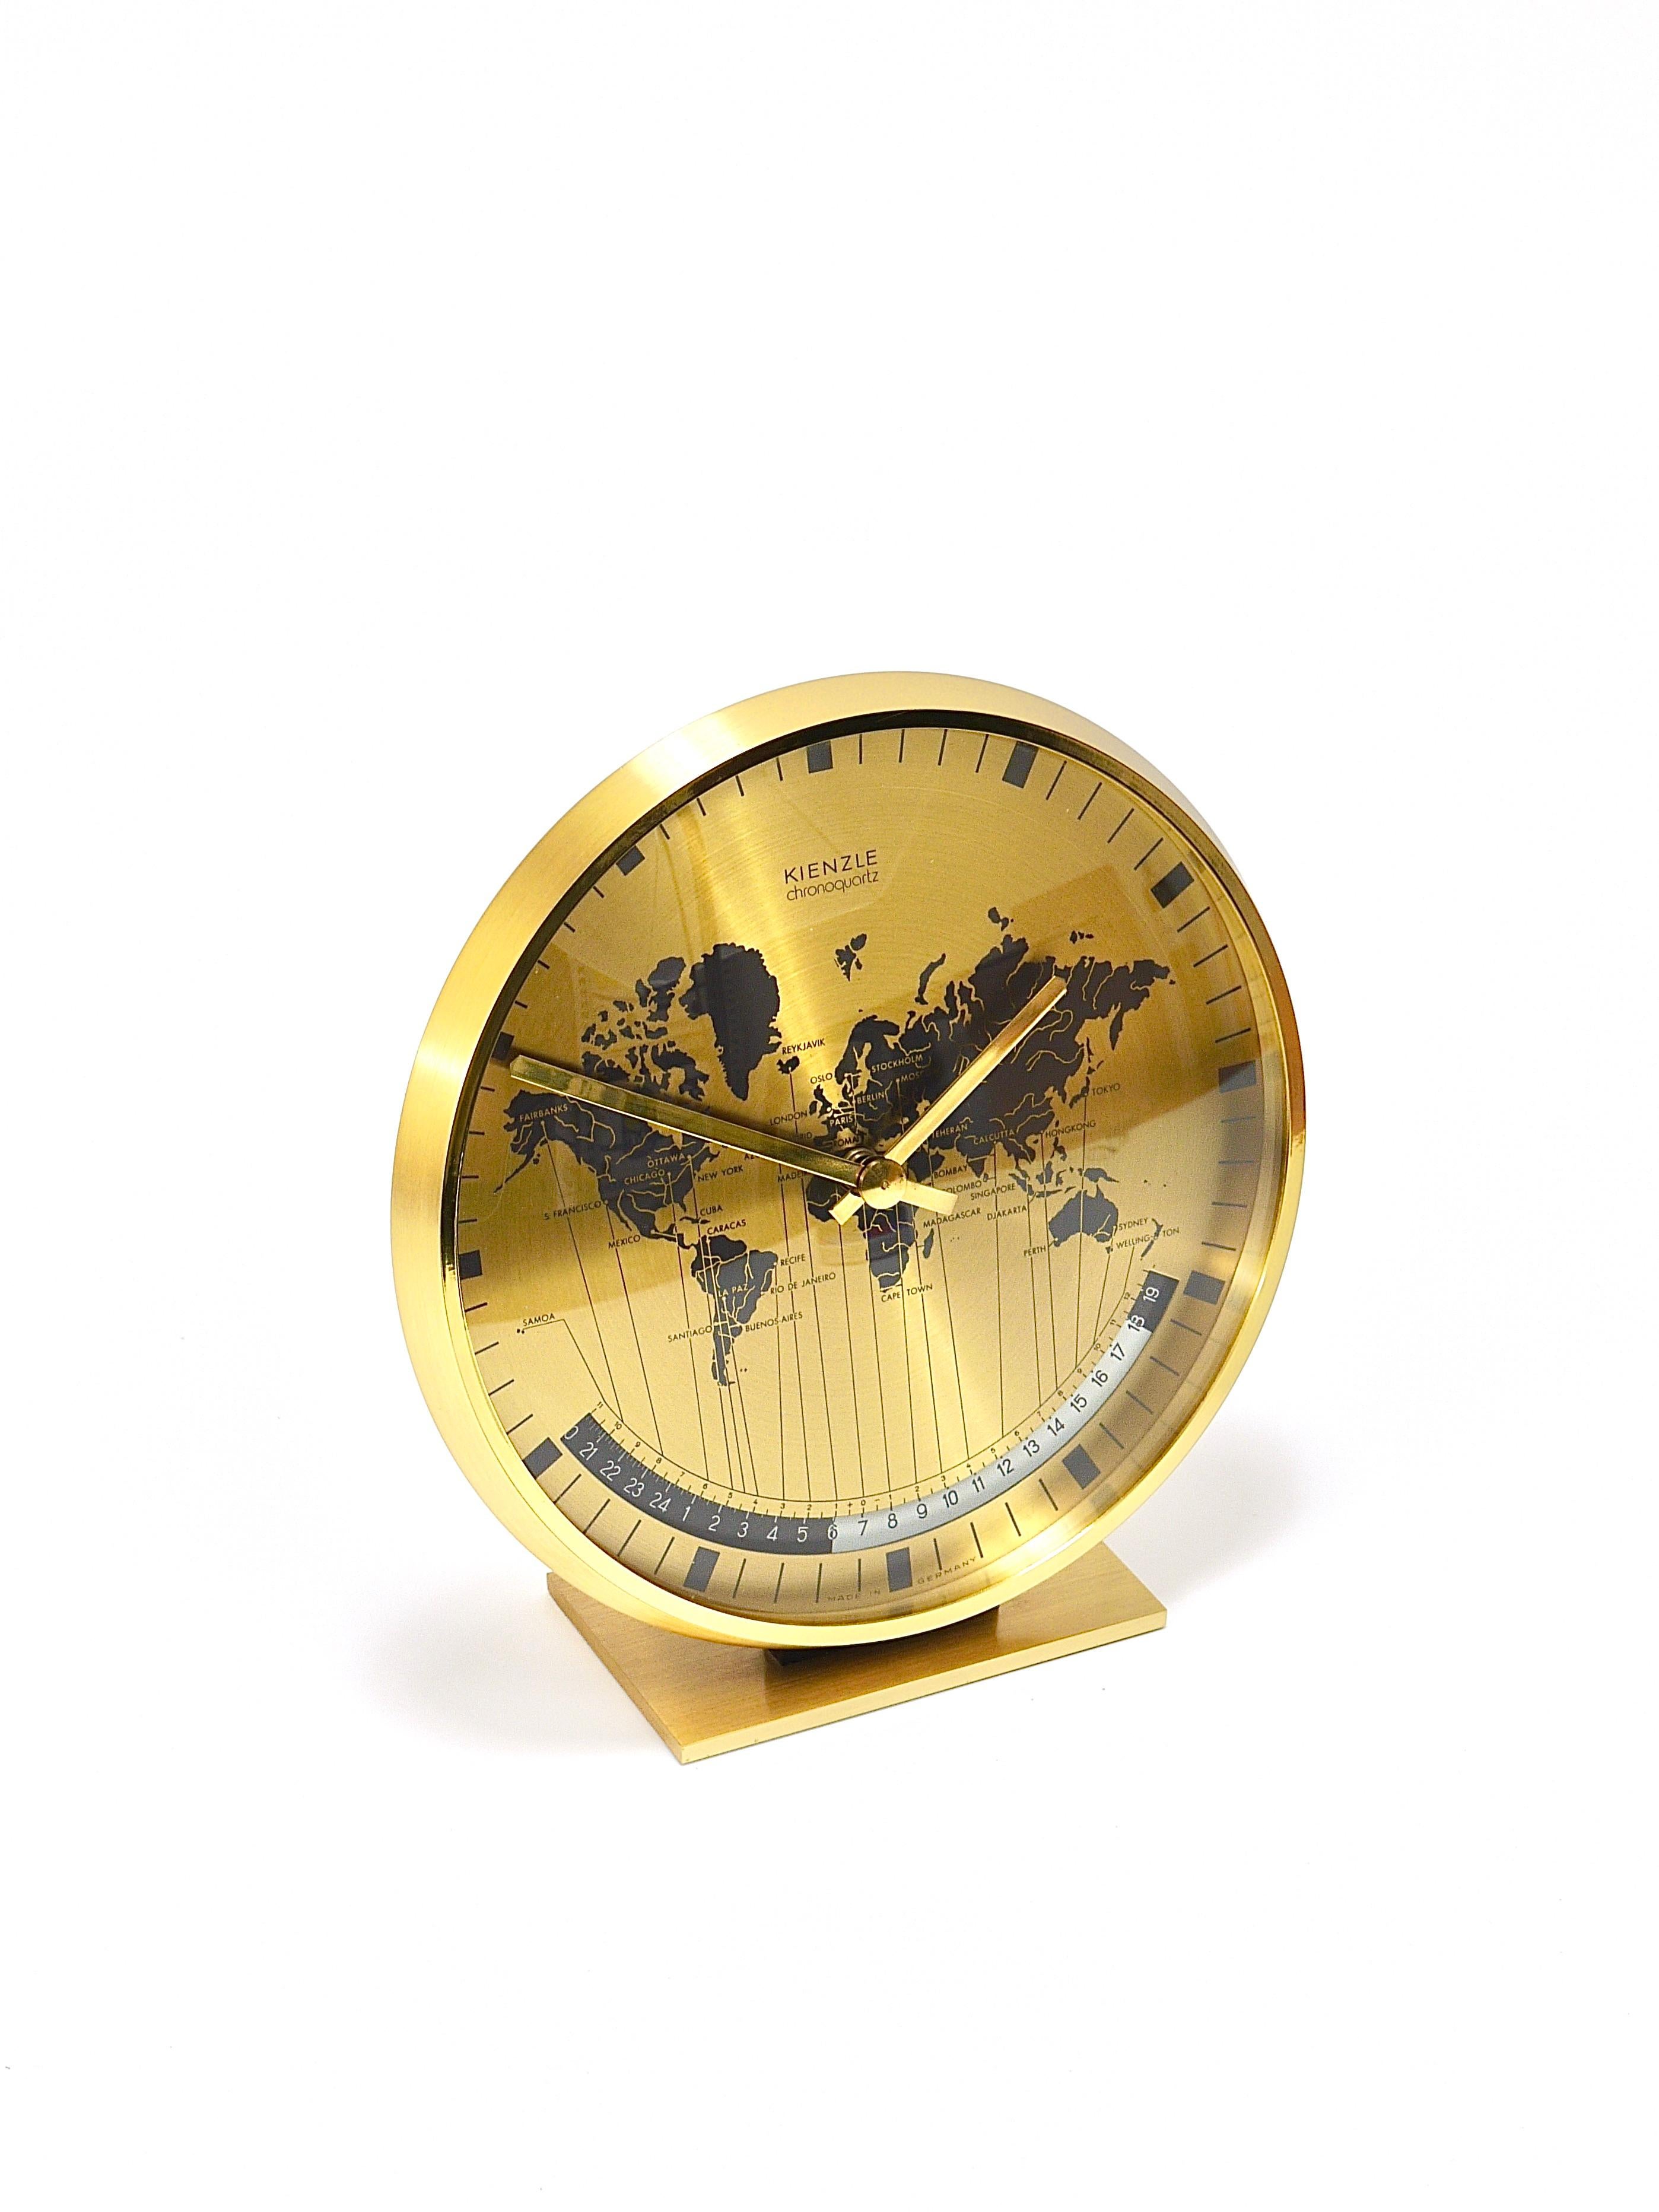 Kienzle GMT World Time Zone Brass Table Clock, Midcentury, Germany, 1960s For Sale 5